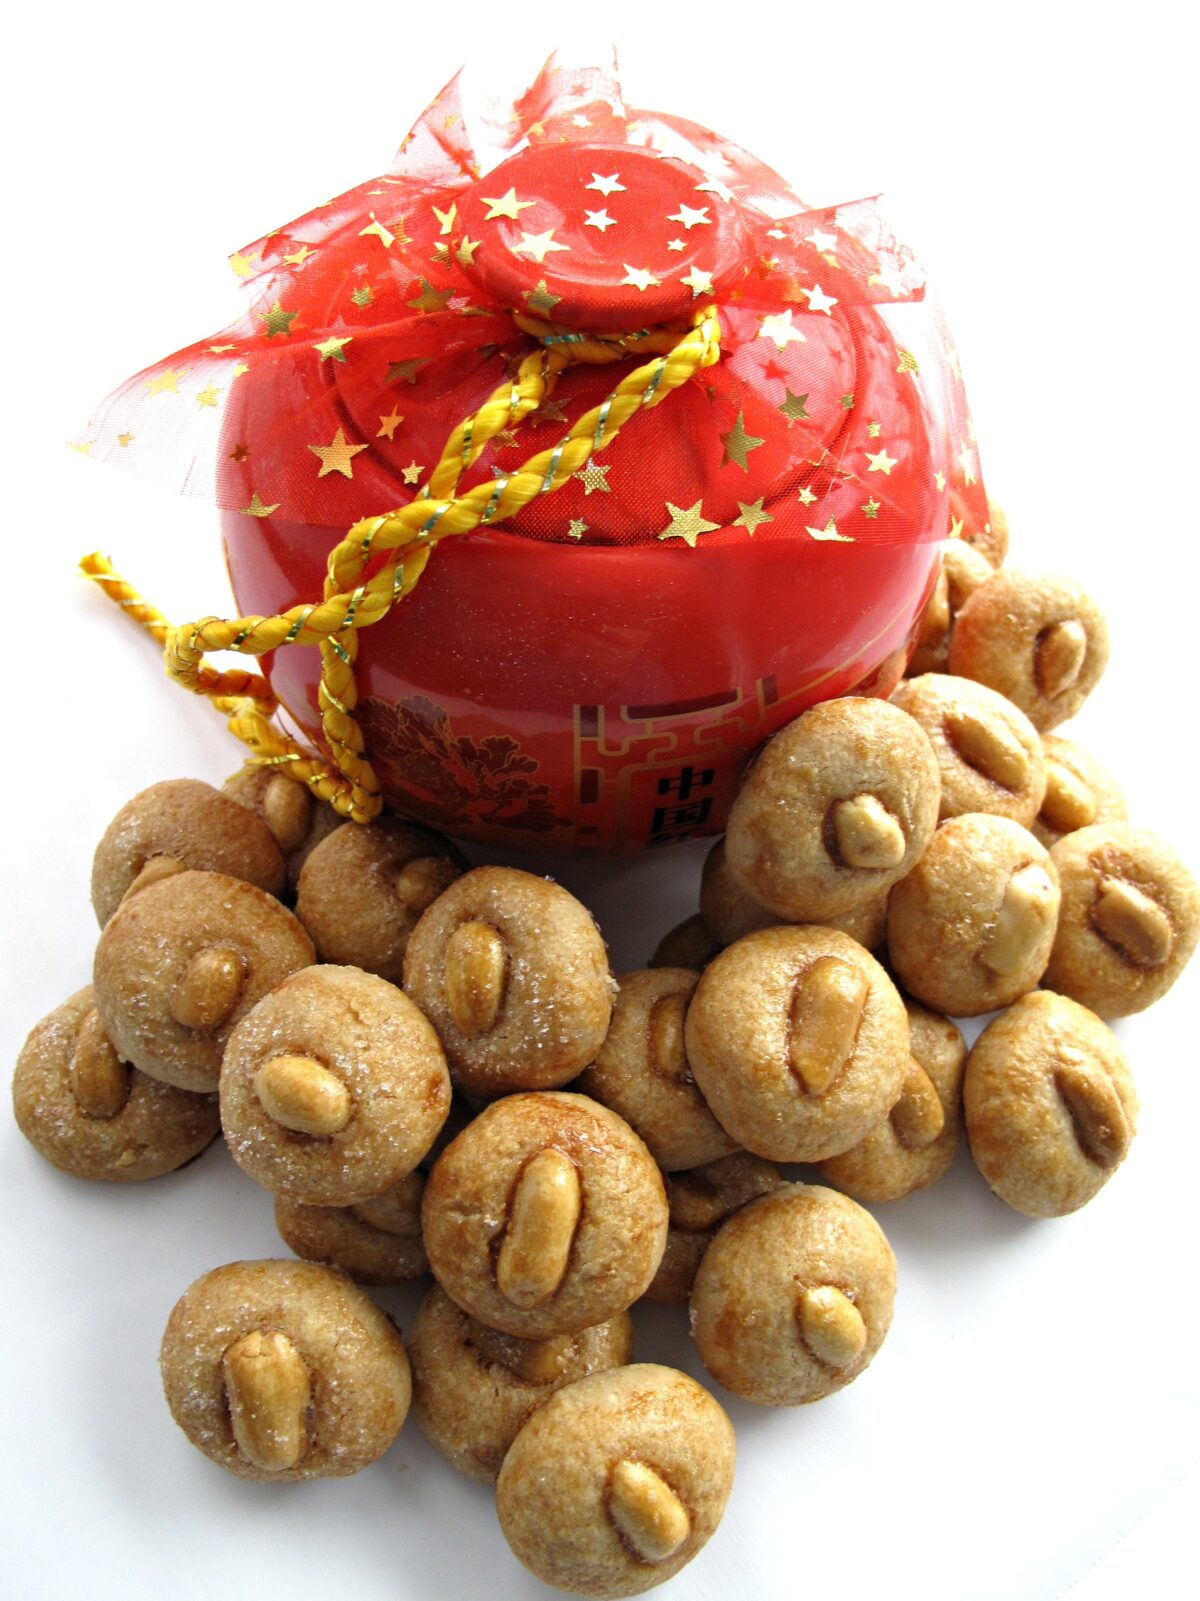 Ball shaped, little cookies topped with a peanut, in front of a red Chinese cookie jar.